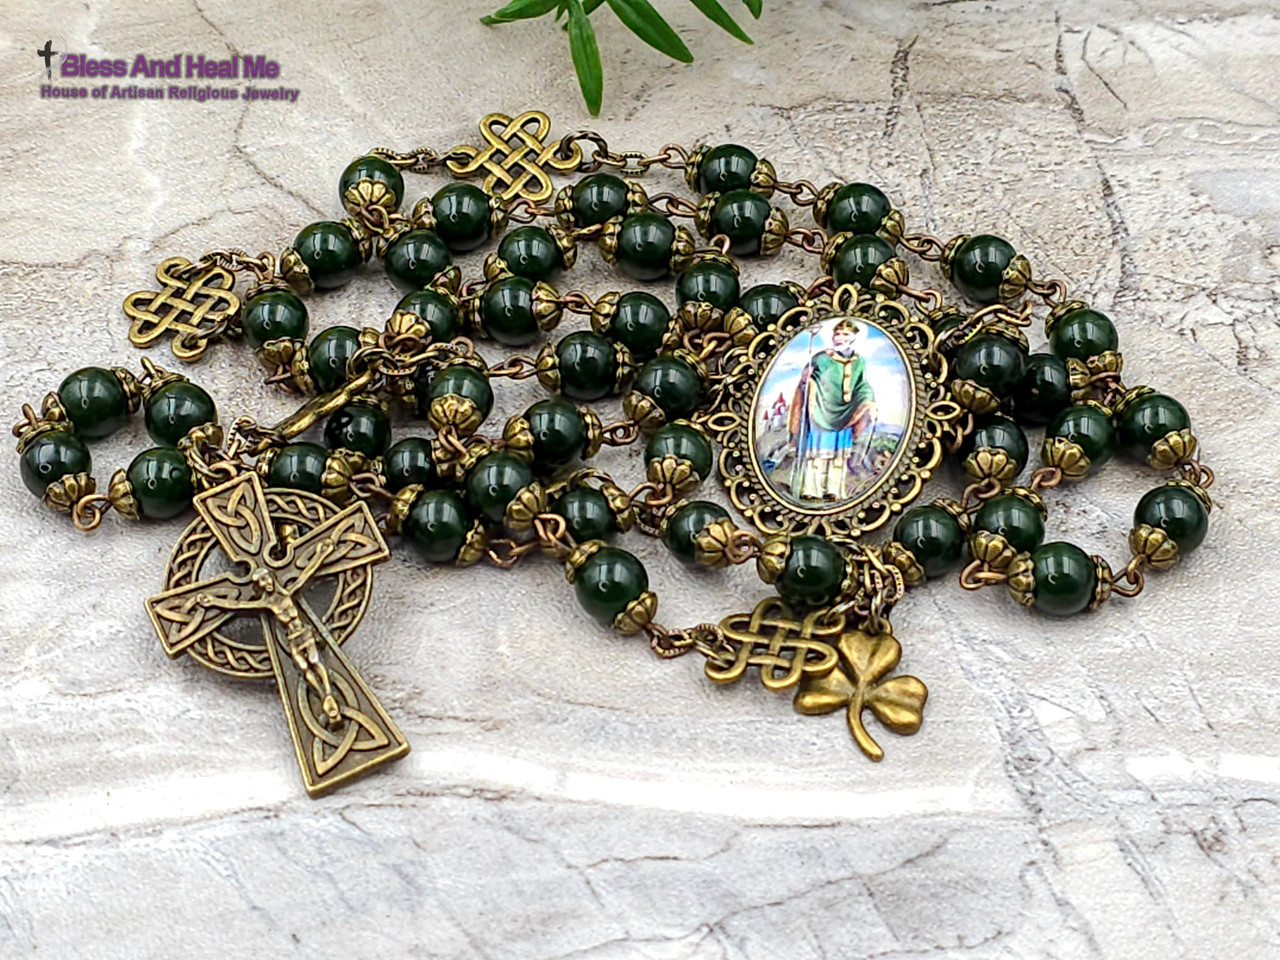 Blue-Green ite and Bronze Rosary